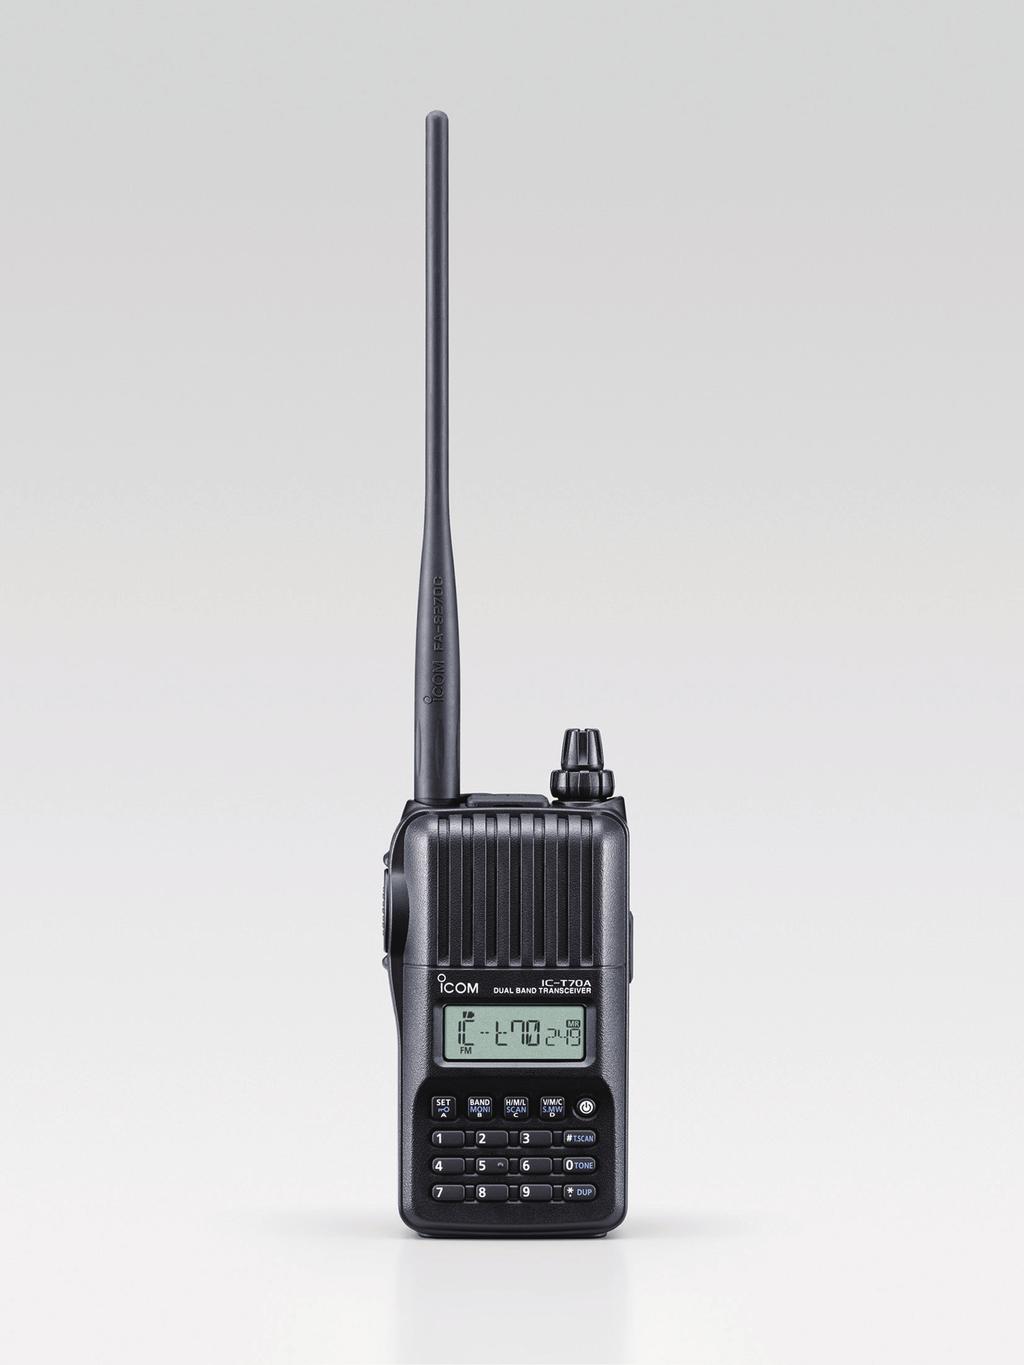 INSTRUCTION MANUAL VHF/UHF DUAL BAND FM TRANSCEIVER it0a it0e This device complies with Part 15 of the FCC Rules.